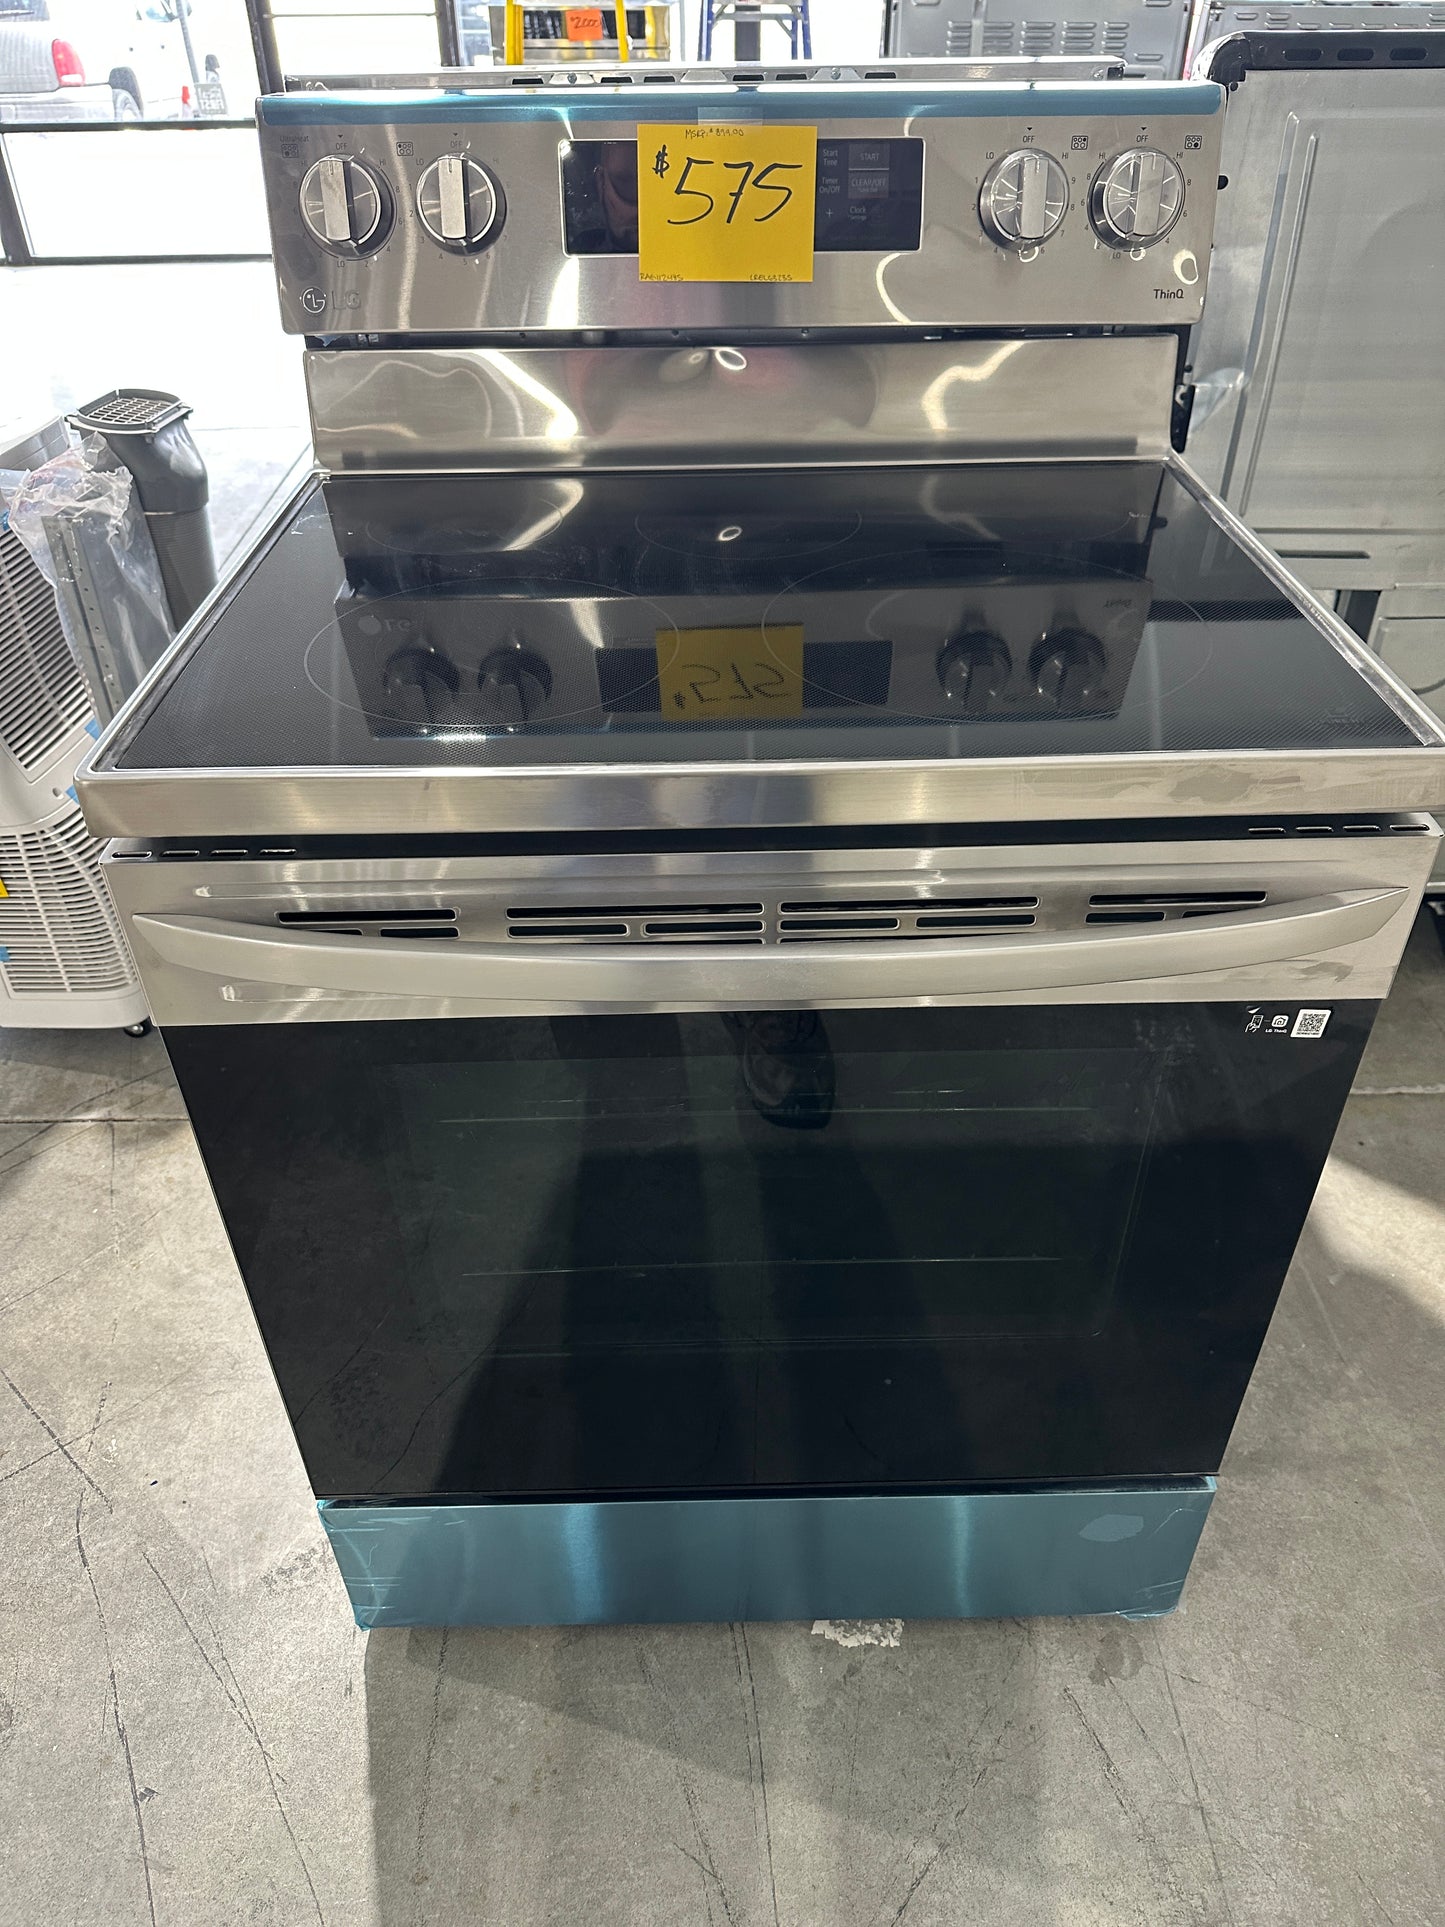 NEW LG ELECTRIC CONVECTION RANGE with EASY CLEAN - RAG11248S LREL6323S